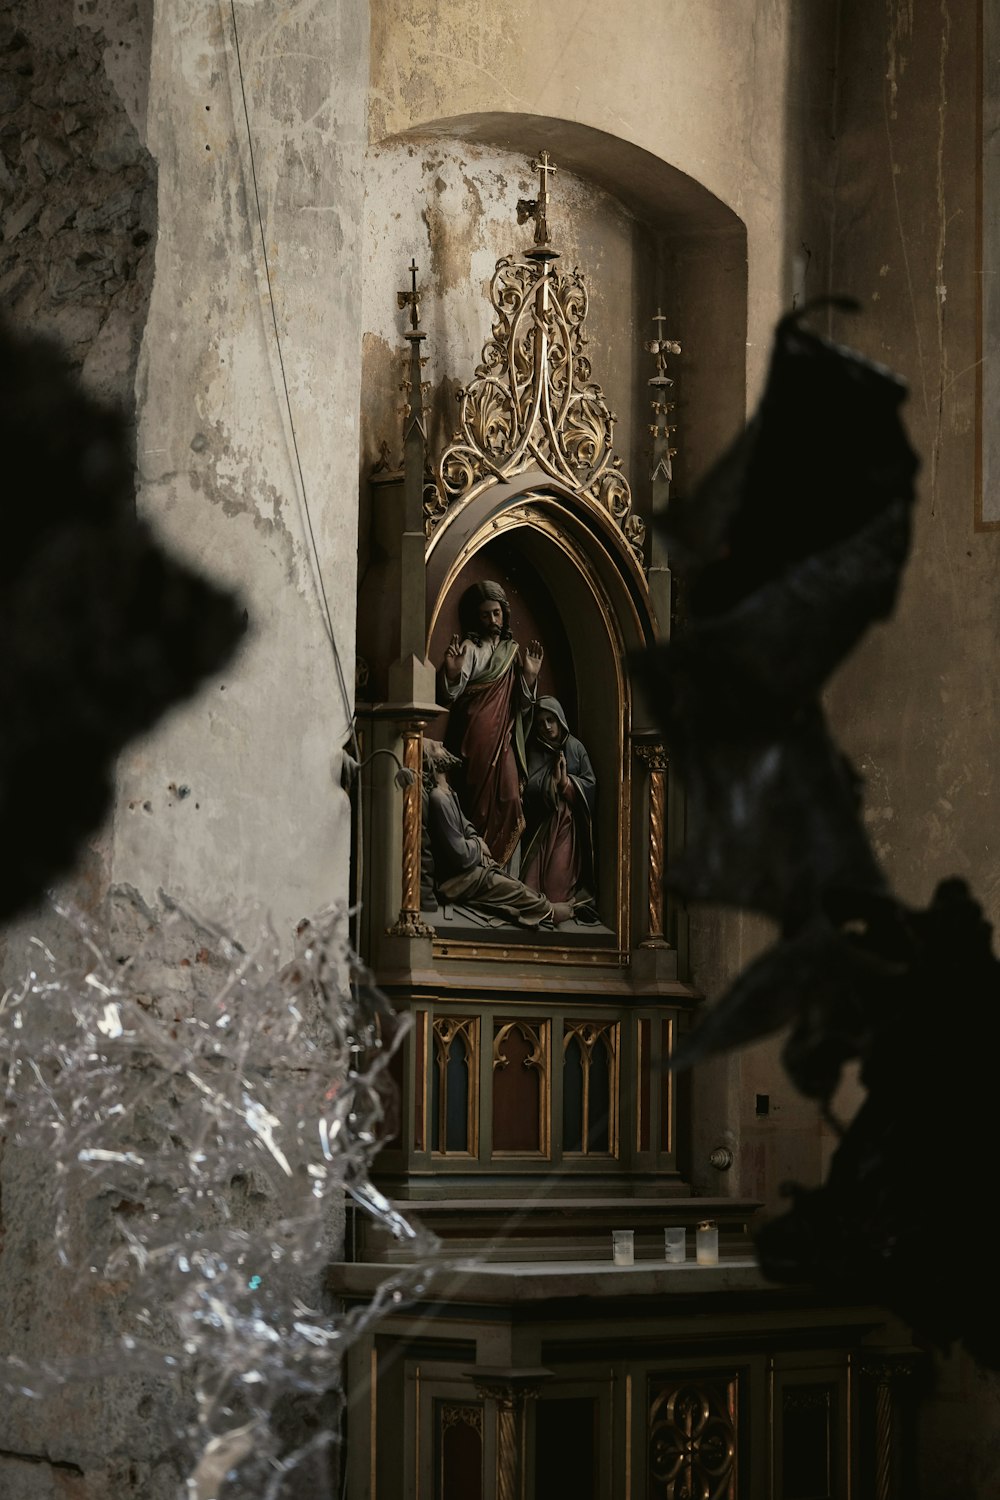 a statue of jesus in a church with broken glass